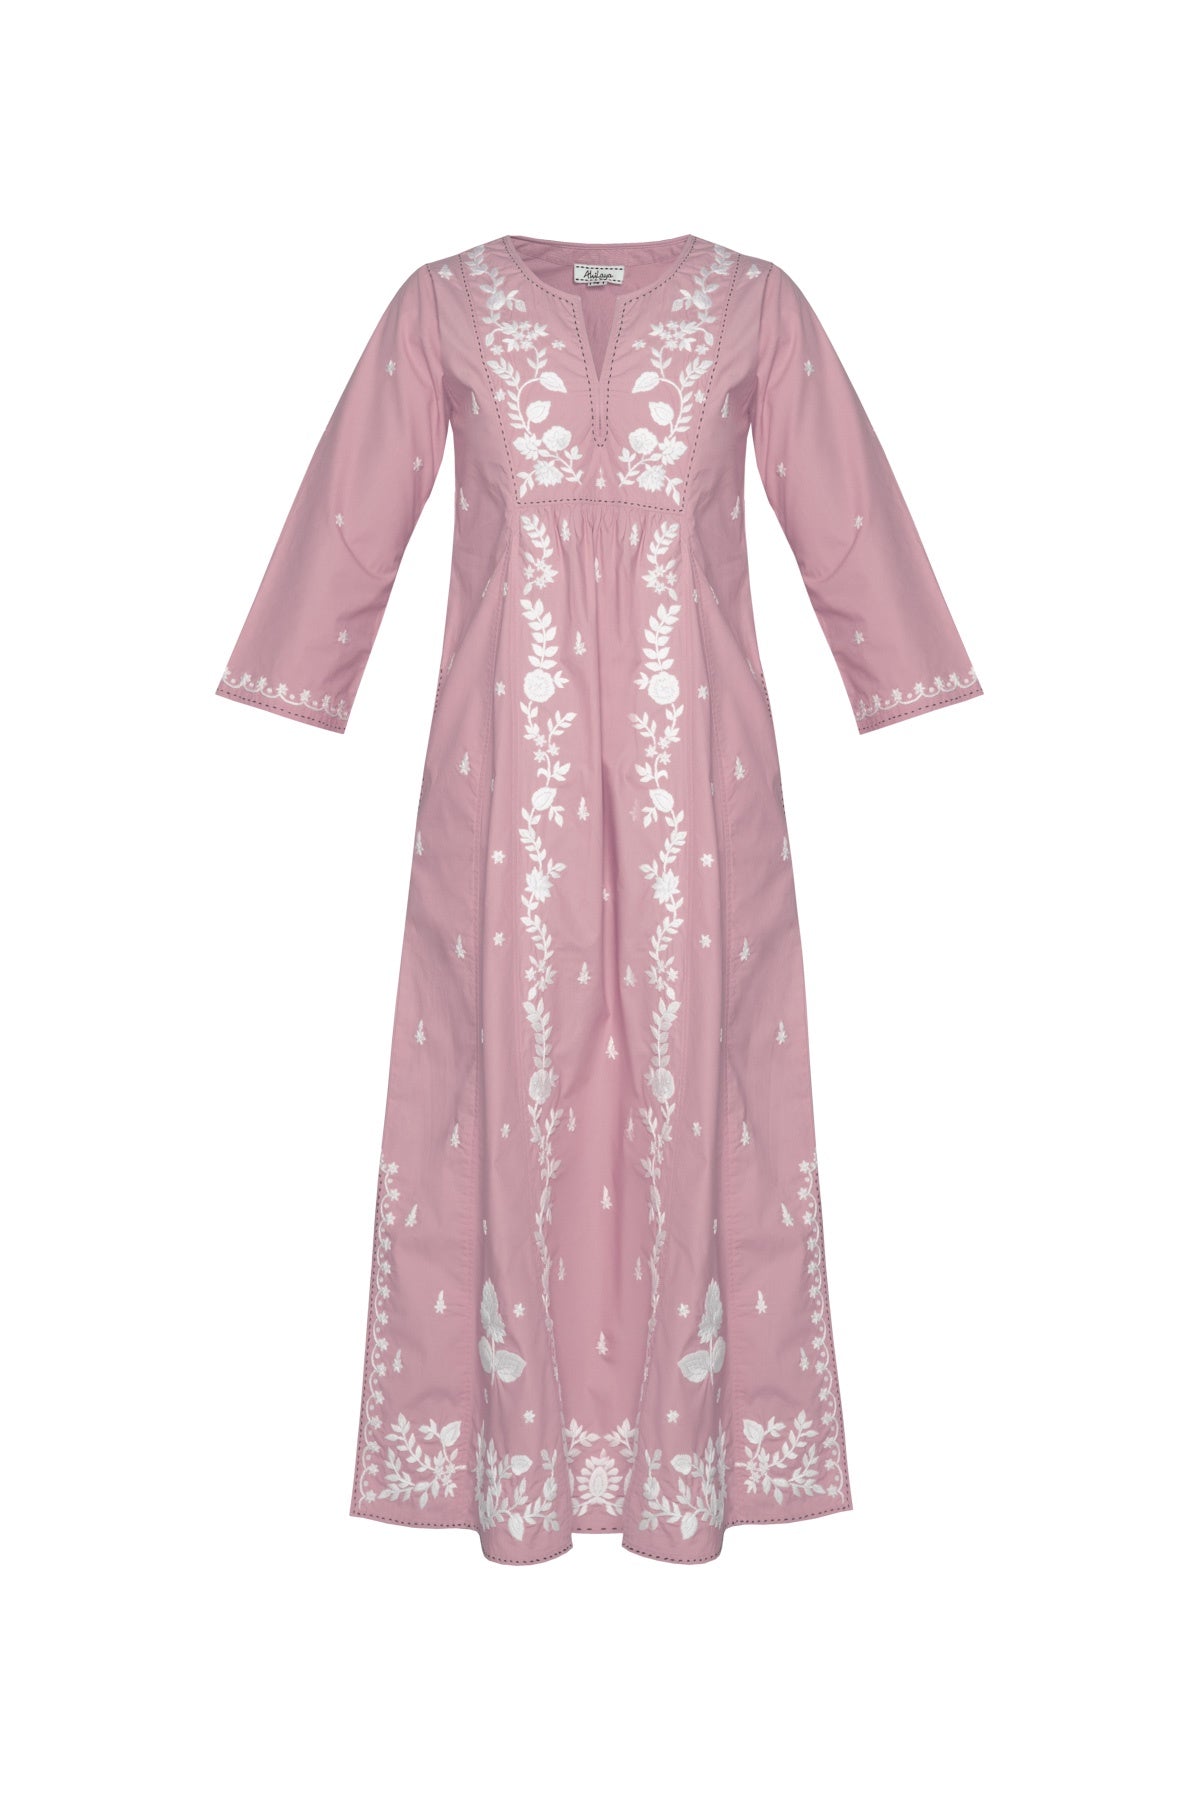 Lotus Cotton Embroidered Dress - Attar Of Roses